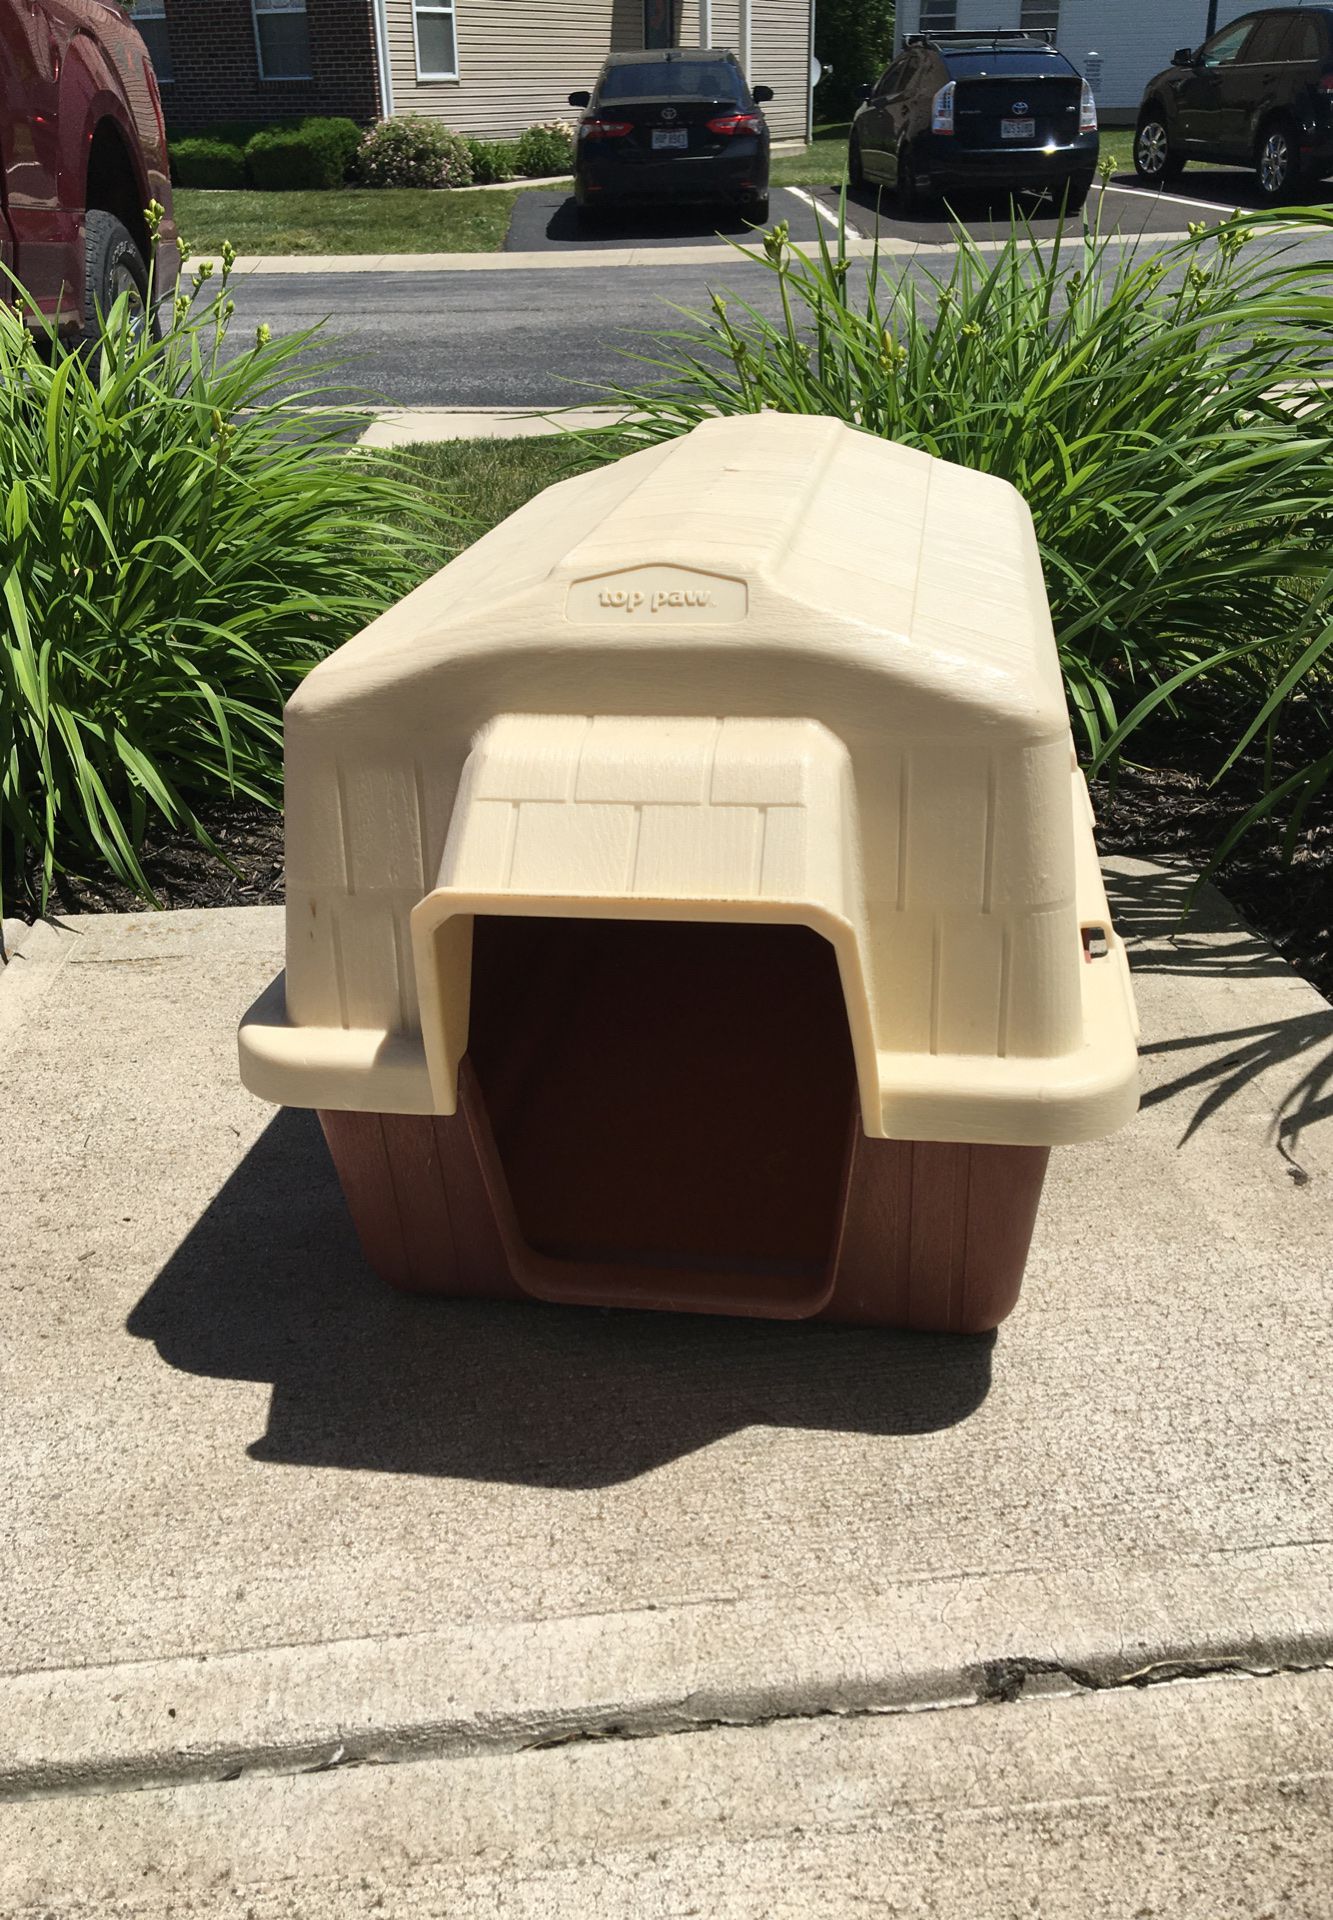 Petmate Top Paw plastic dog house for small dog -please see detailed size in description